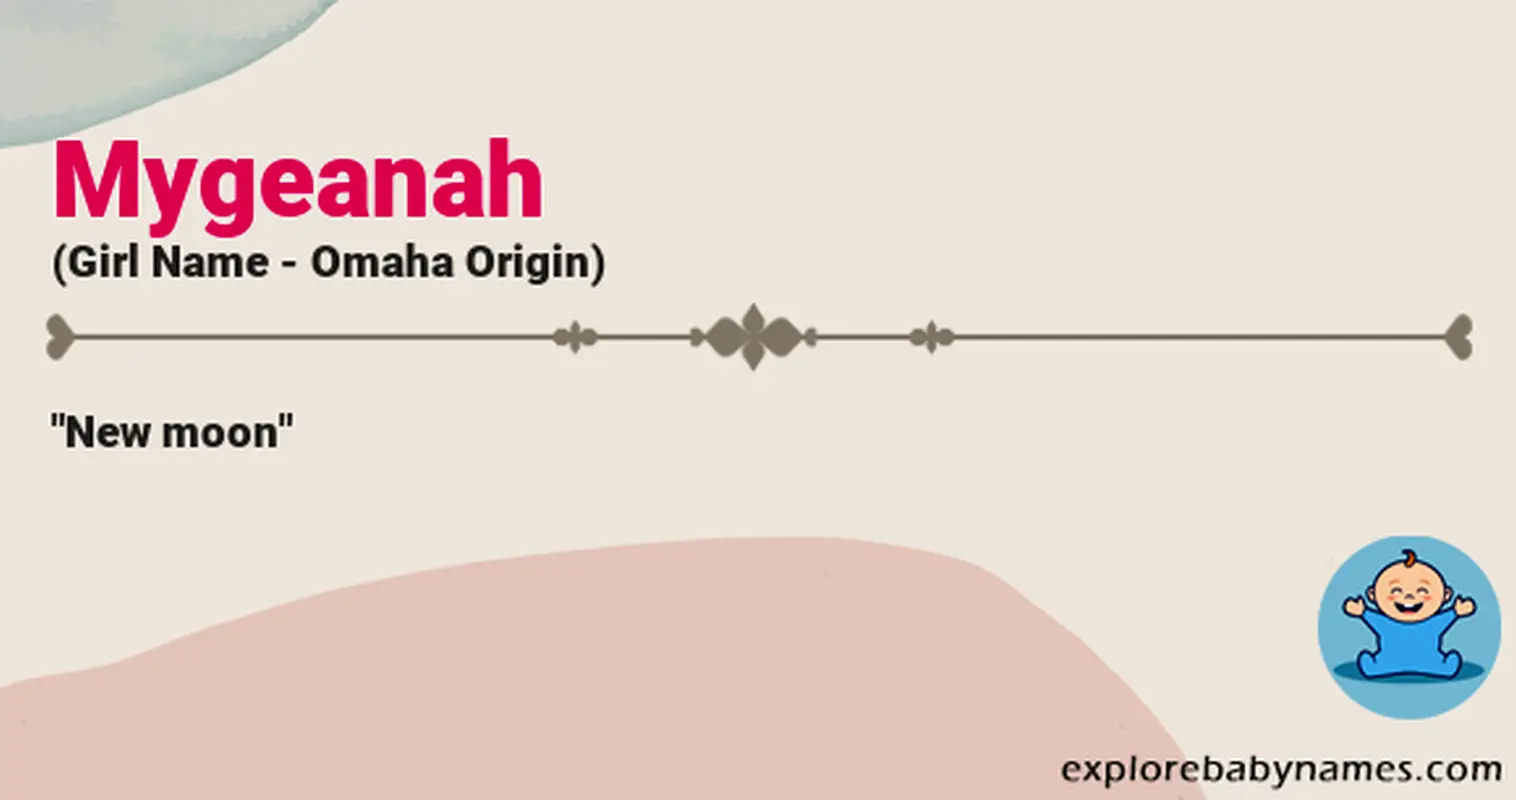 Meaning of Mygeanah